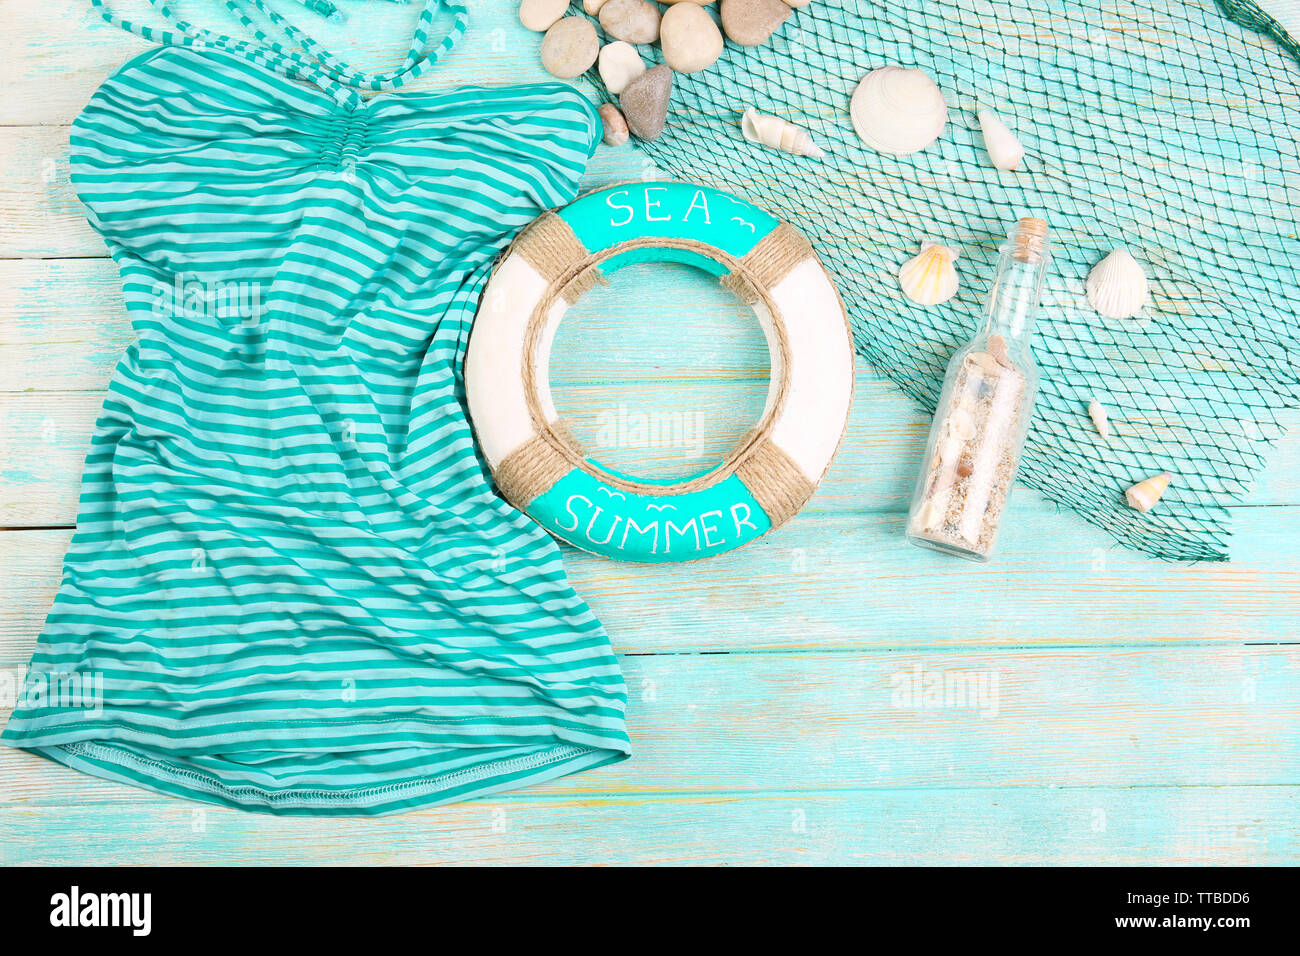 Summer accessories on wooden background Stock Photo